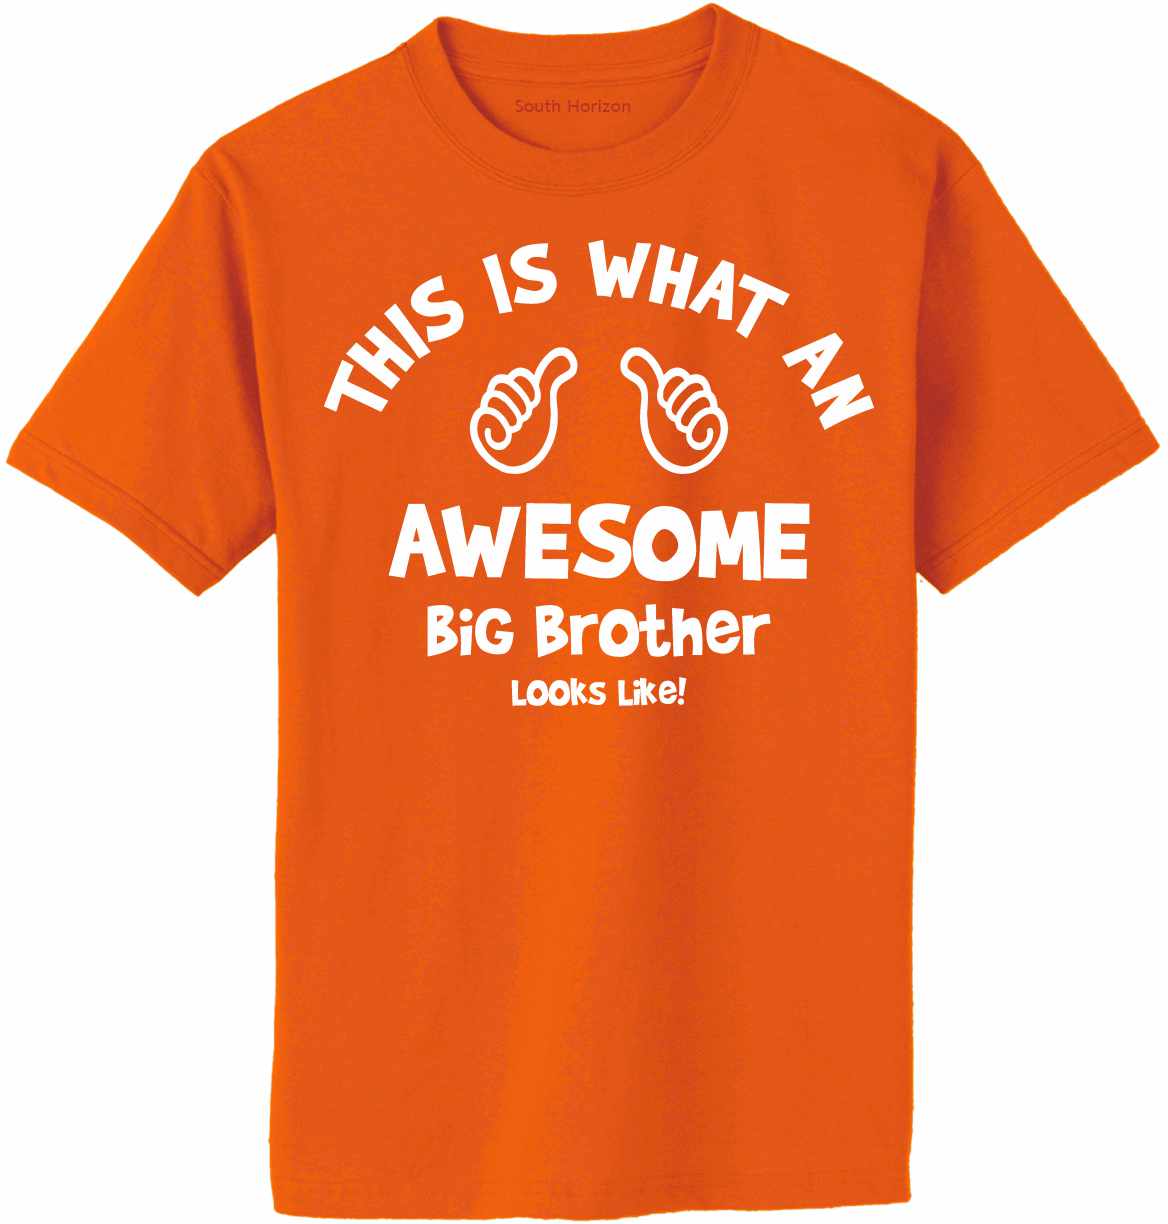 This is What an AWESOME BIG BROTHER Looks Like Adult T-Shirt